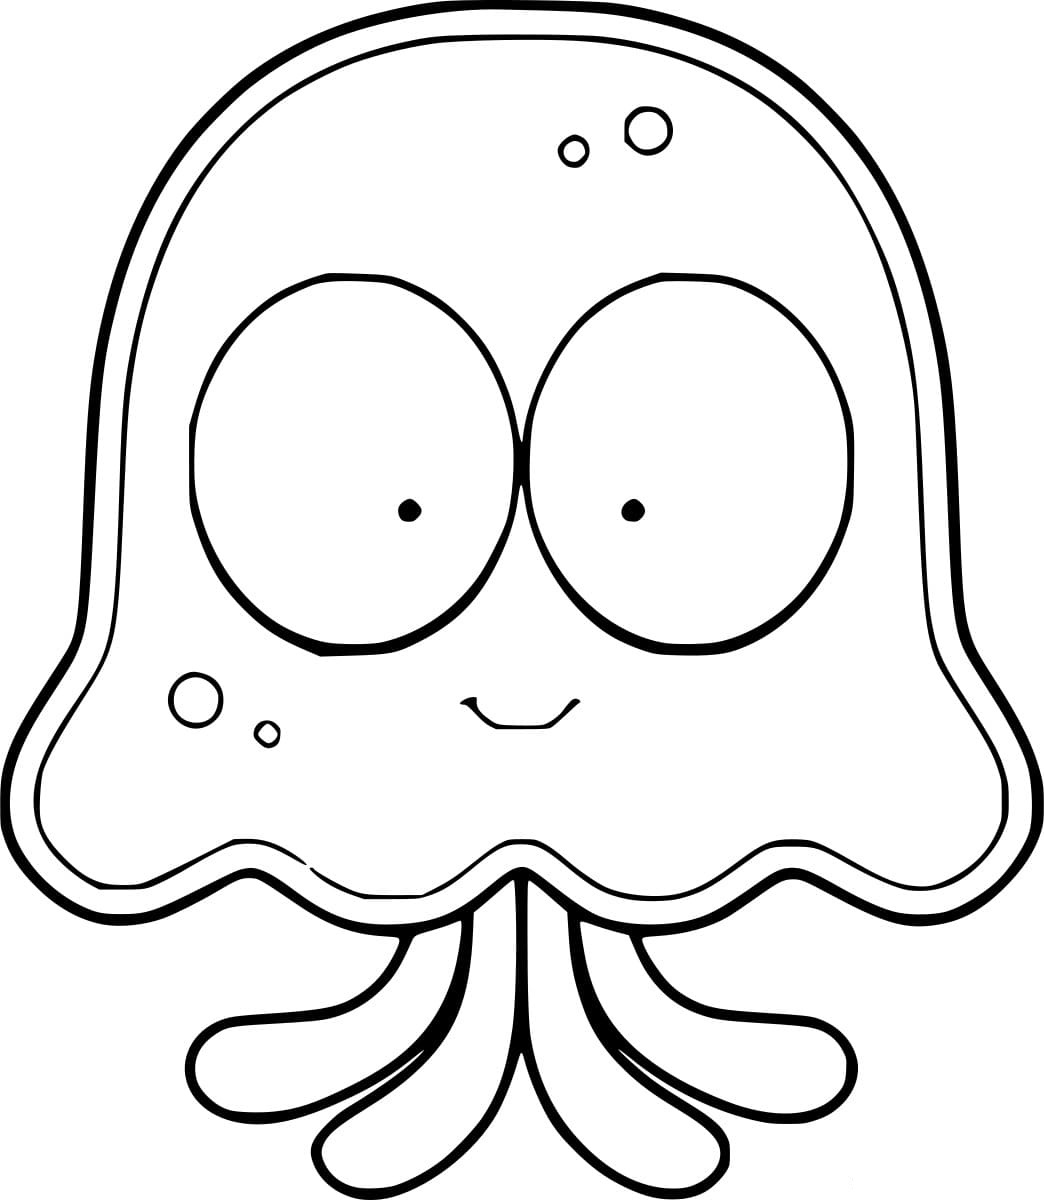 Cartoon Cute Jellyfish Image Coloring Page